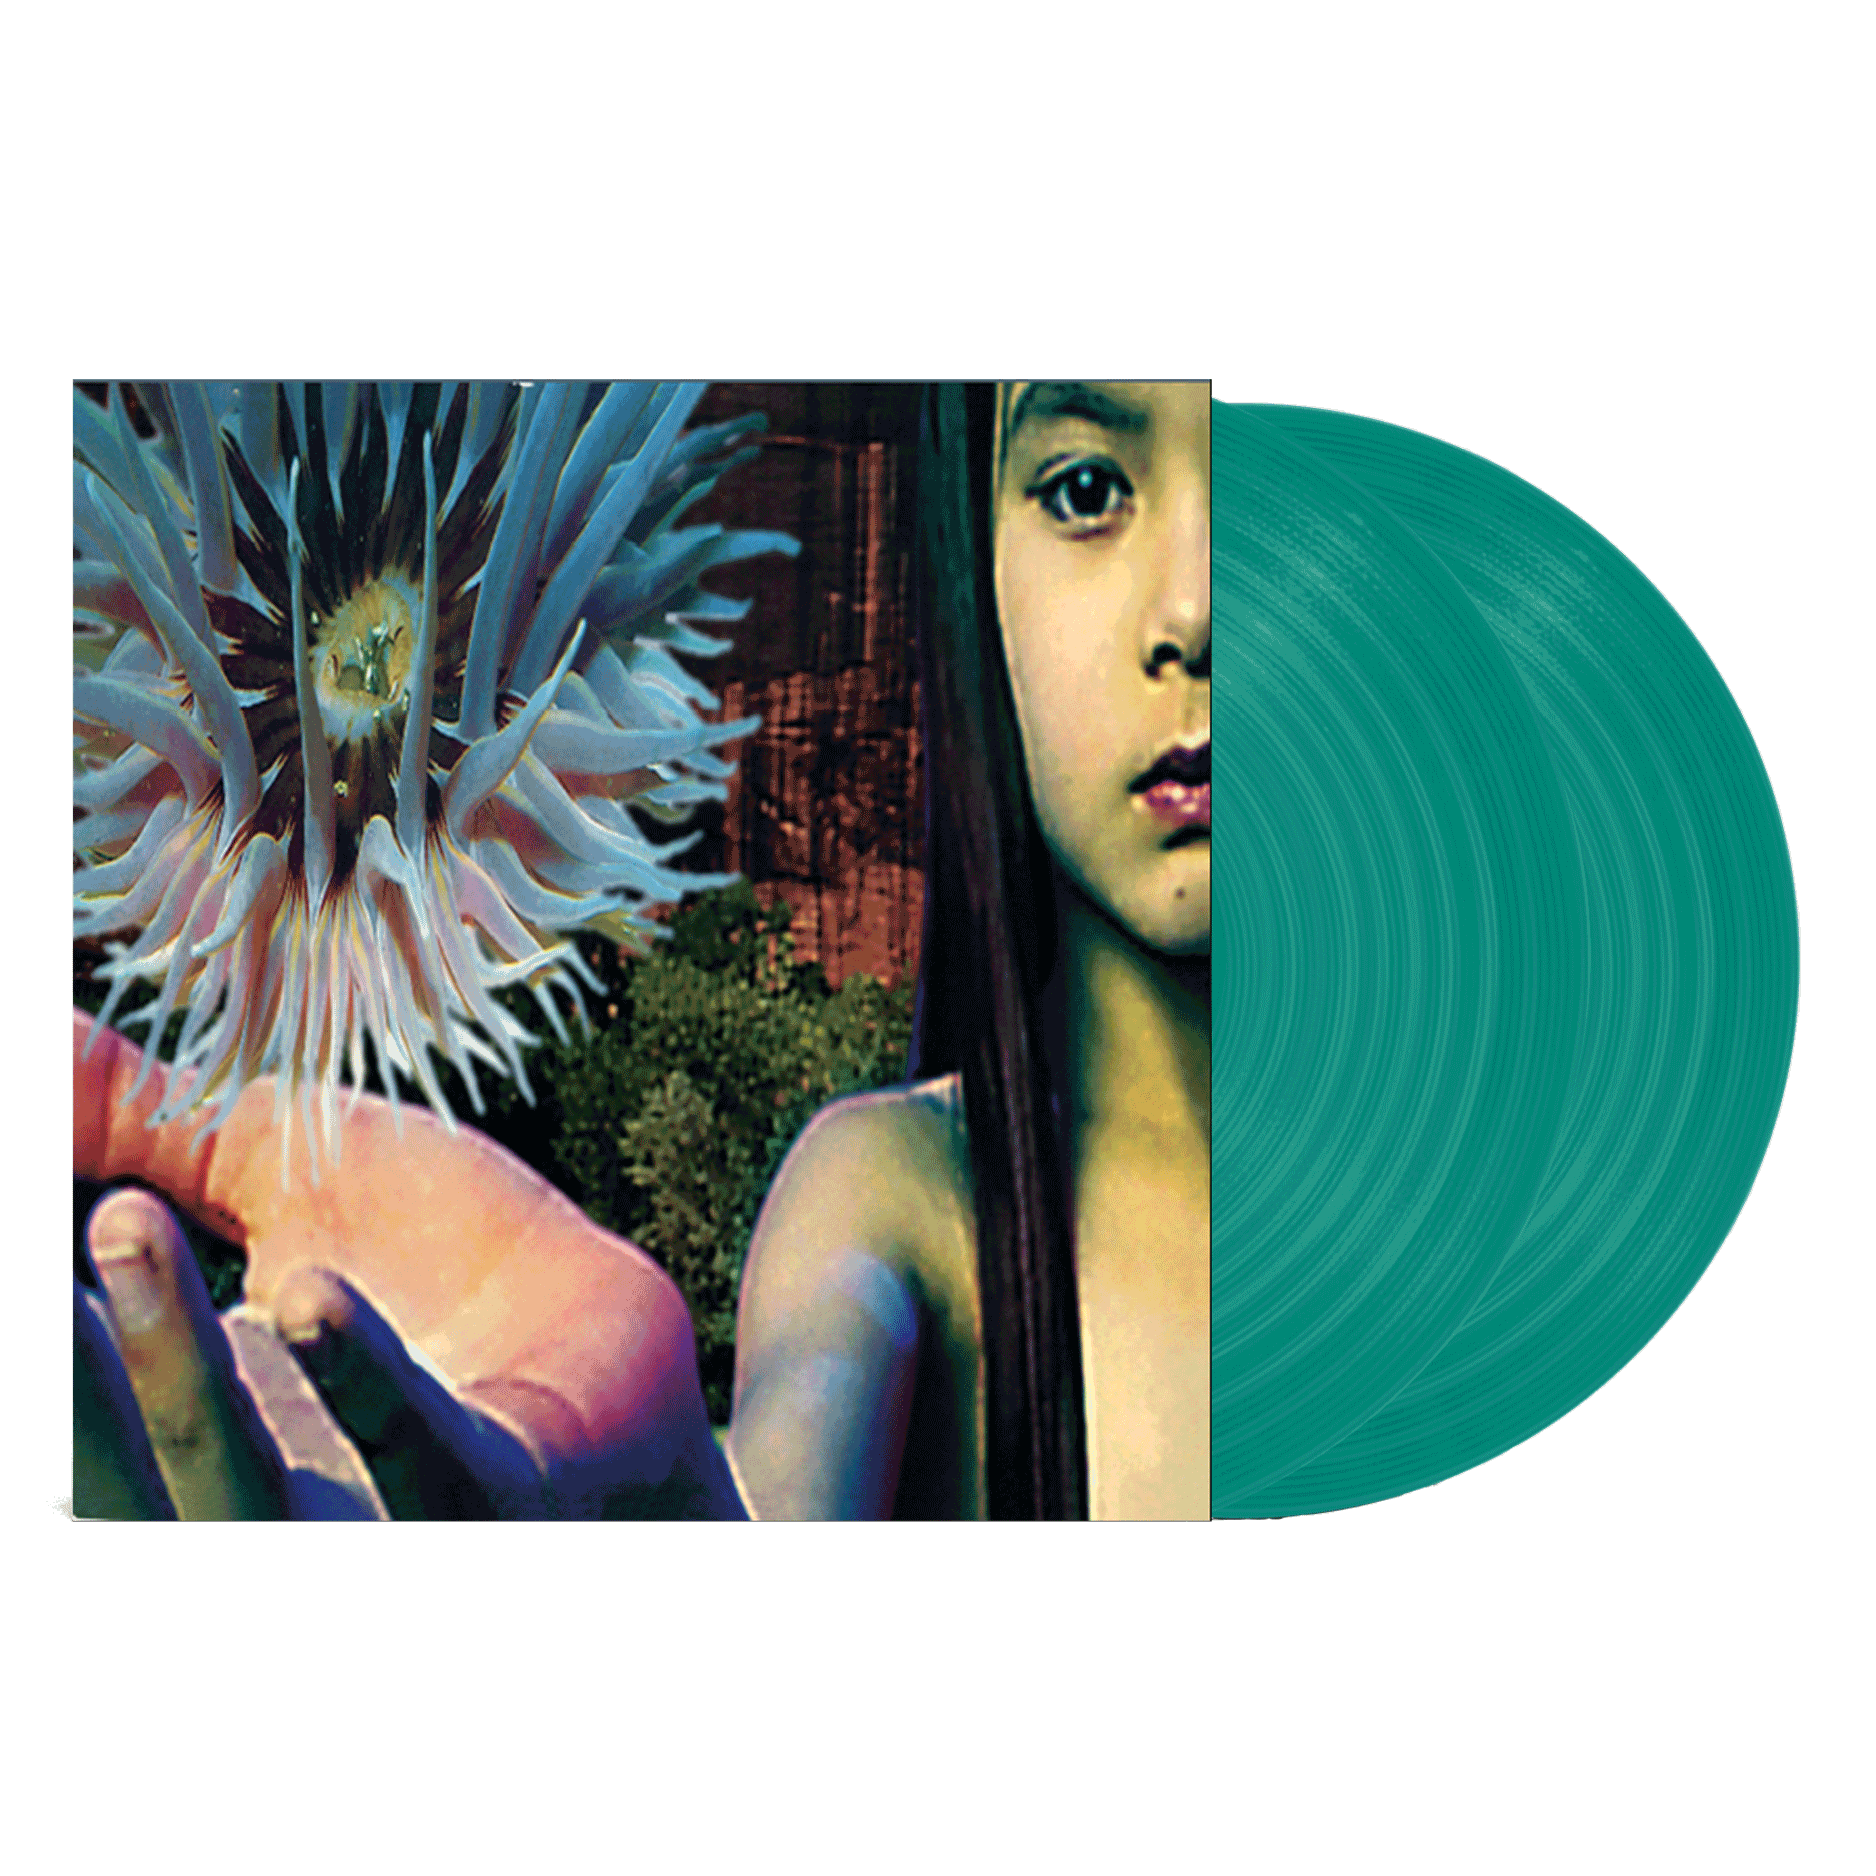 The Future Sound Of London - Lifeforms: Limited Green Vinyl 2LP 